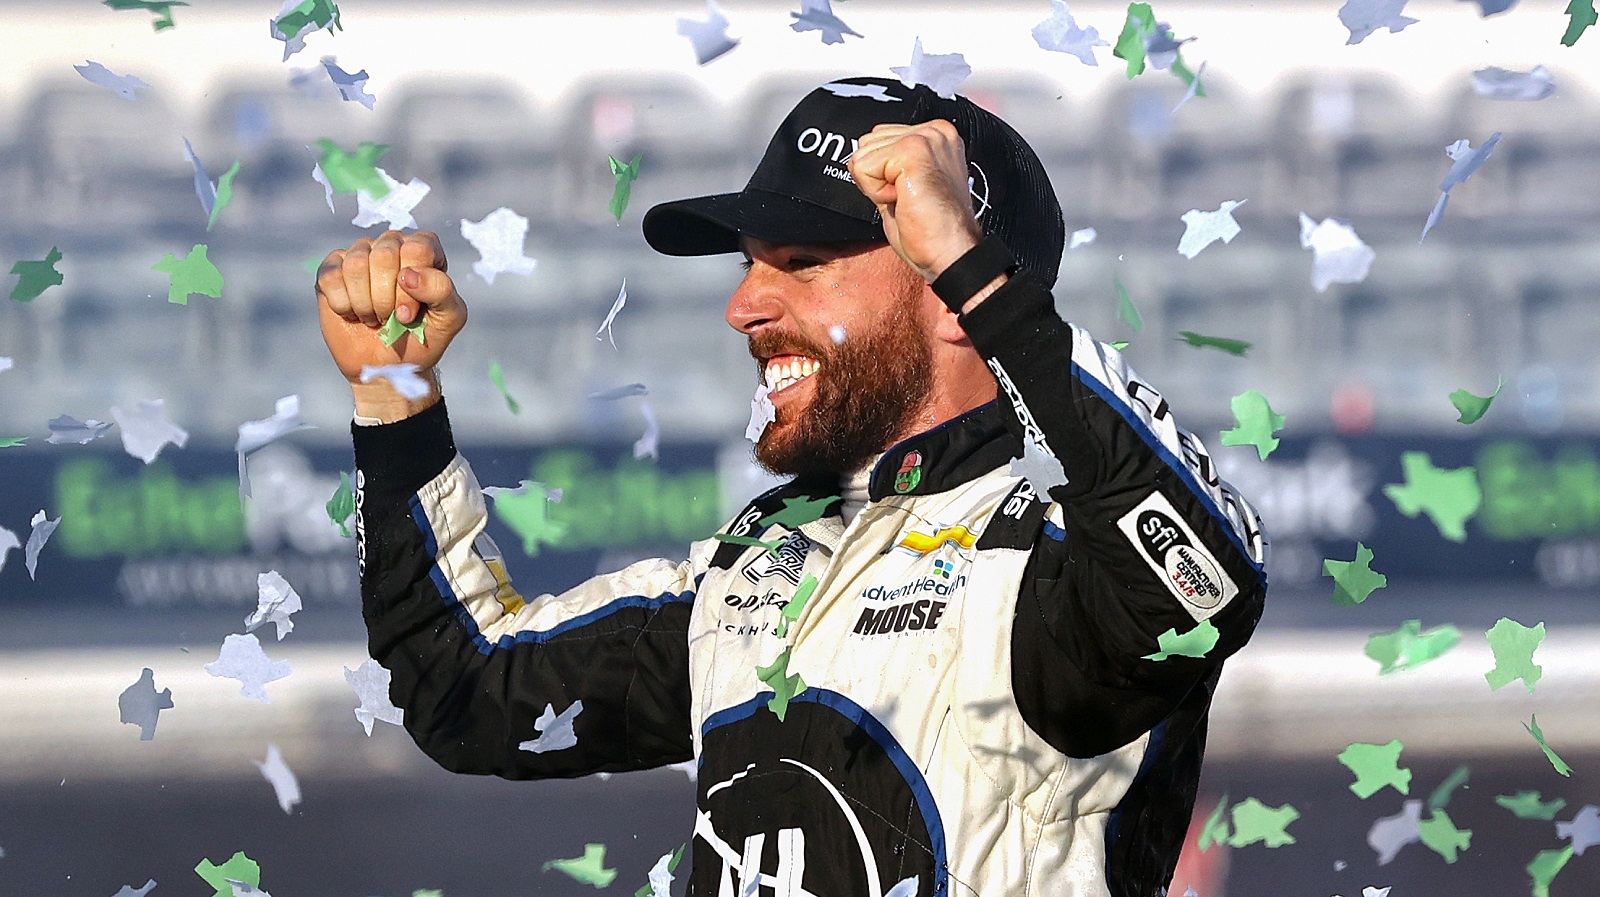 Ross Chastain, driver of the No. 1 Chevrolet, celebrates in Victory Lane after winning the NASCAR Cup Series EchoPark Automotive Grand Prix at Circuit of The Americas on March 27, 2022.